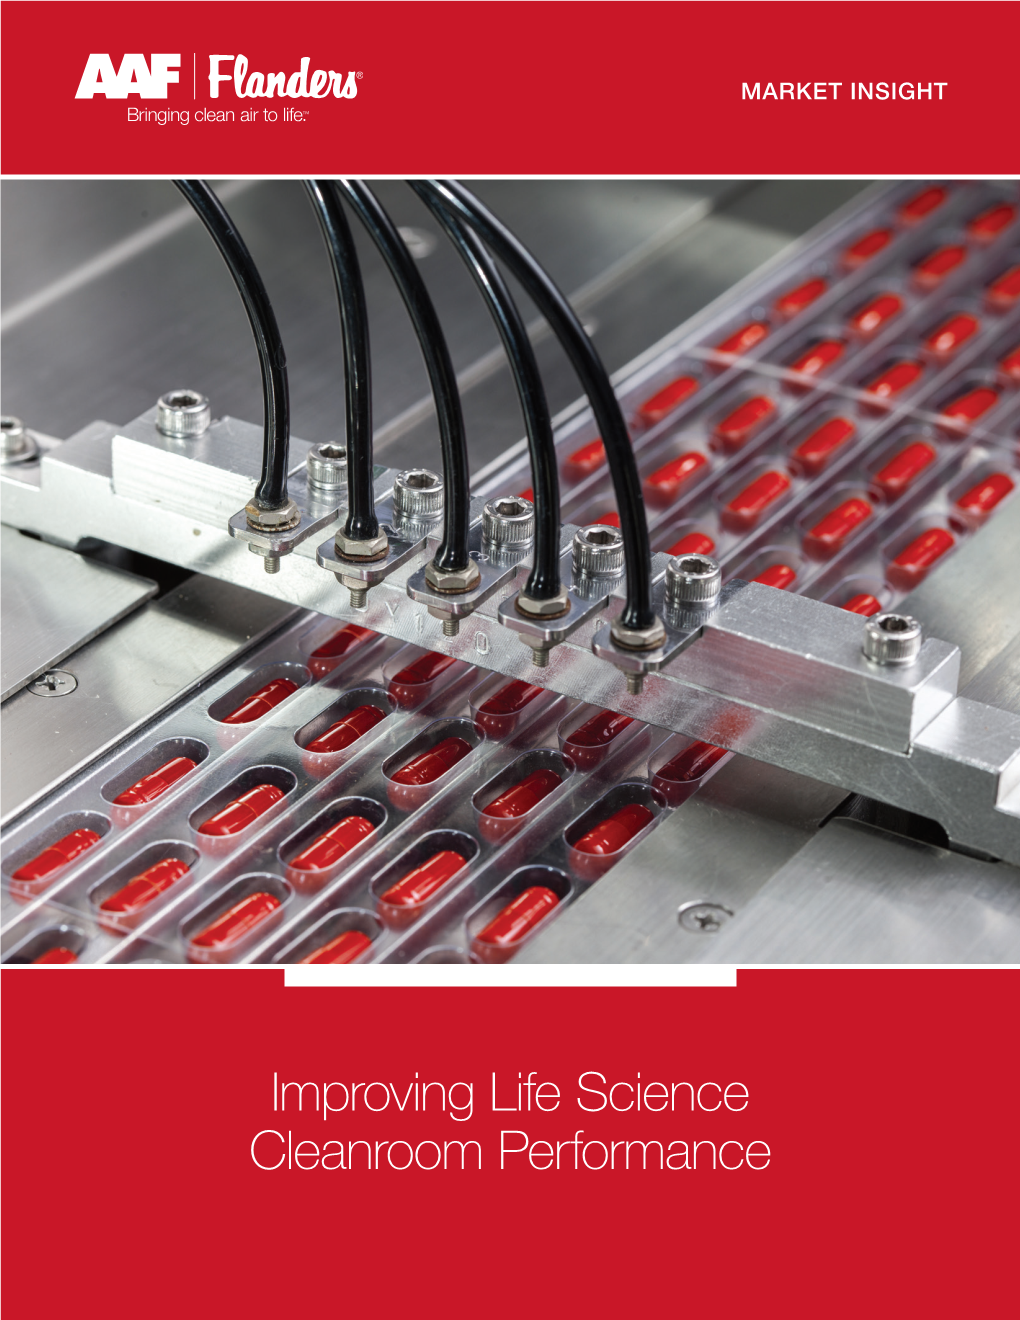 Improving Life Science Cleanroom Performance AAF Flanders Has an In-Depth Understanding of the Challenges and Opportunities for Life Science Manufacturing Processes